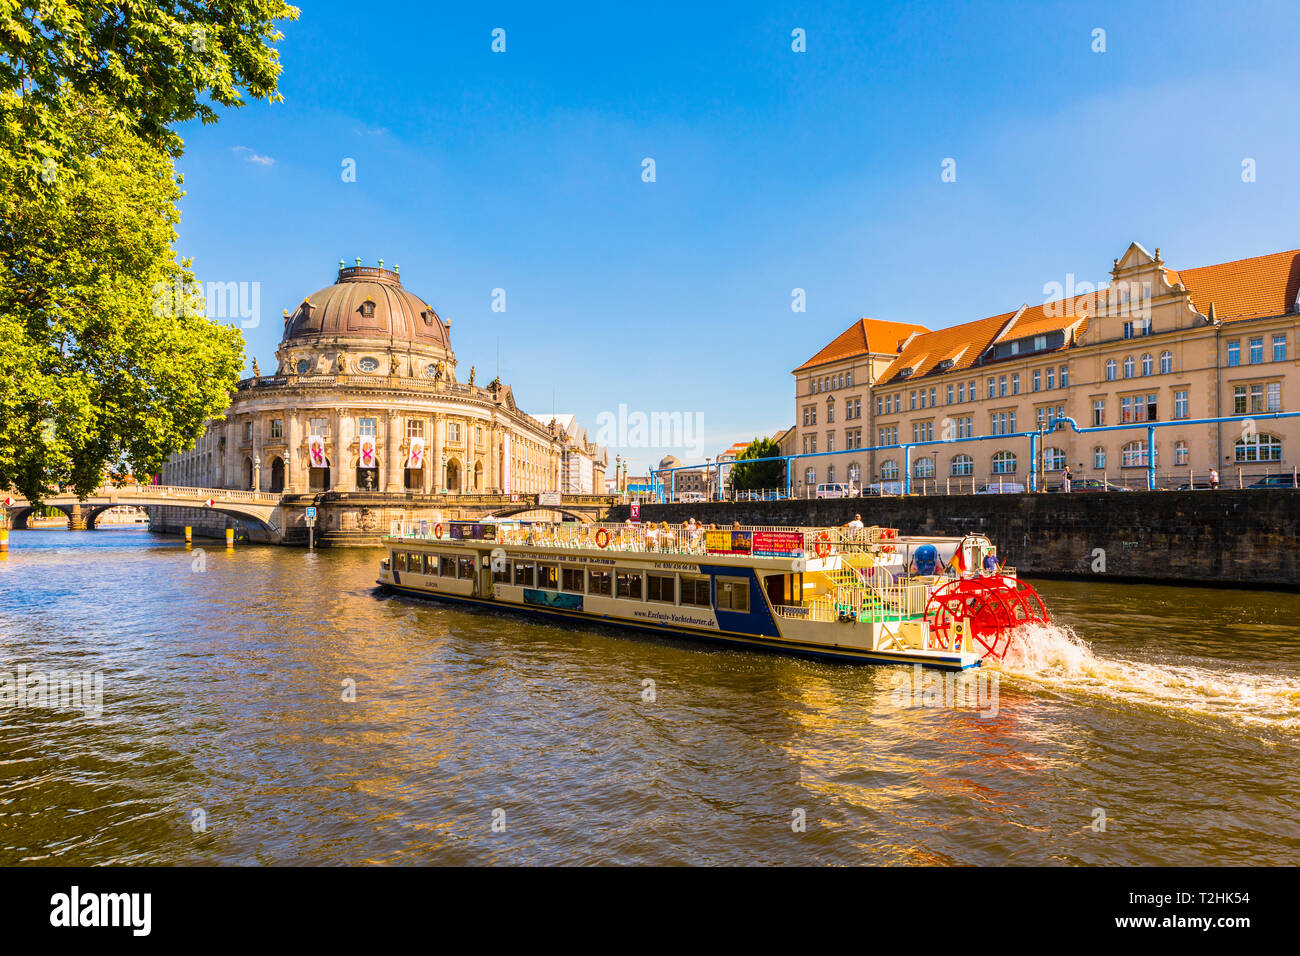 Bode Museum on the River Spree in Berlin, Germany, Europe Stock Photo